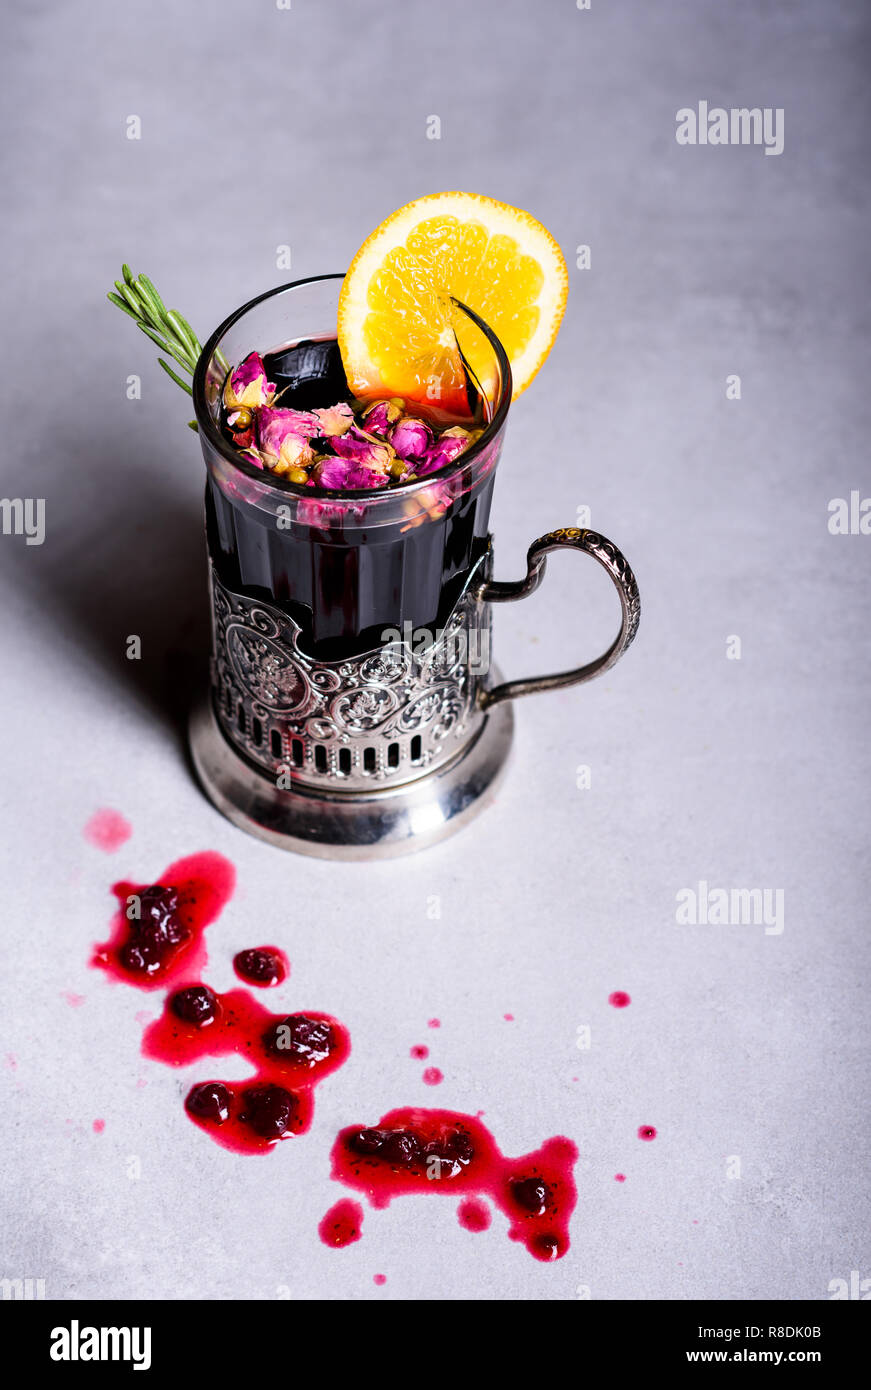 Christmas mulled wine or gluhwein with spices and orange slices. Hot winter drink. Copy space. Stock Photo